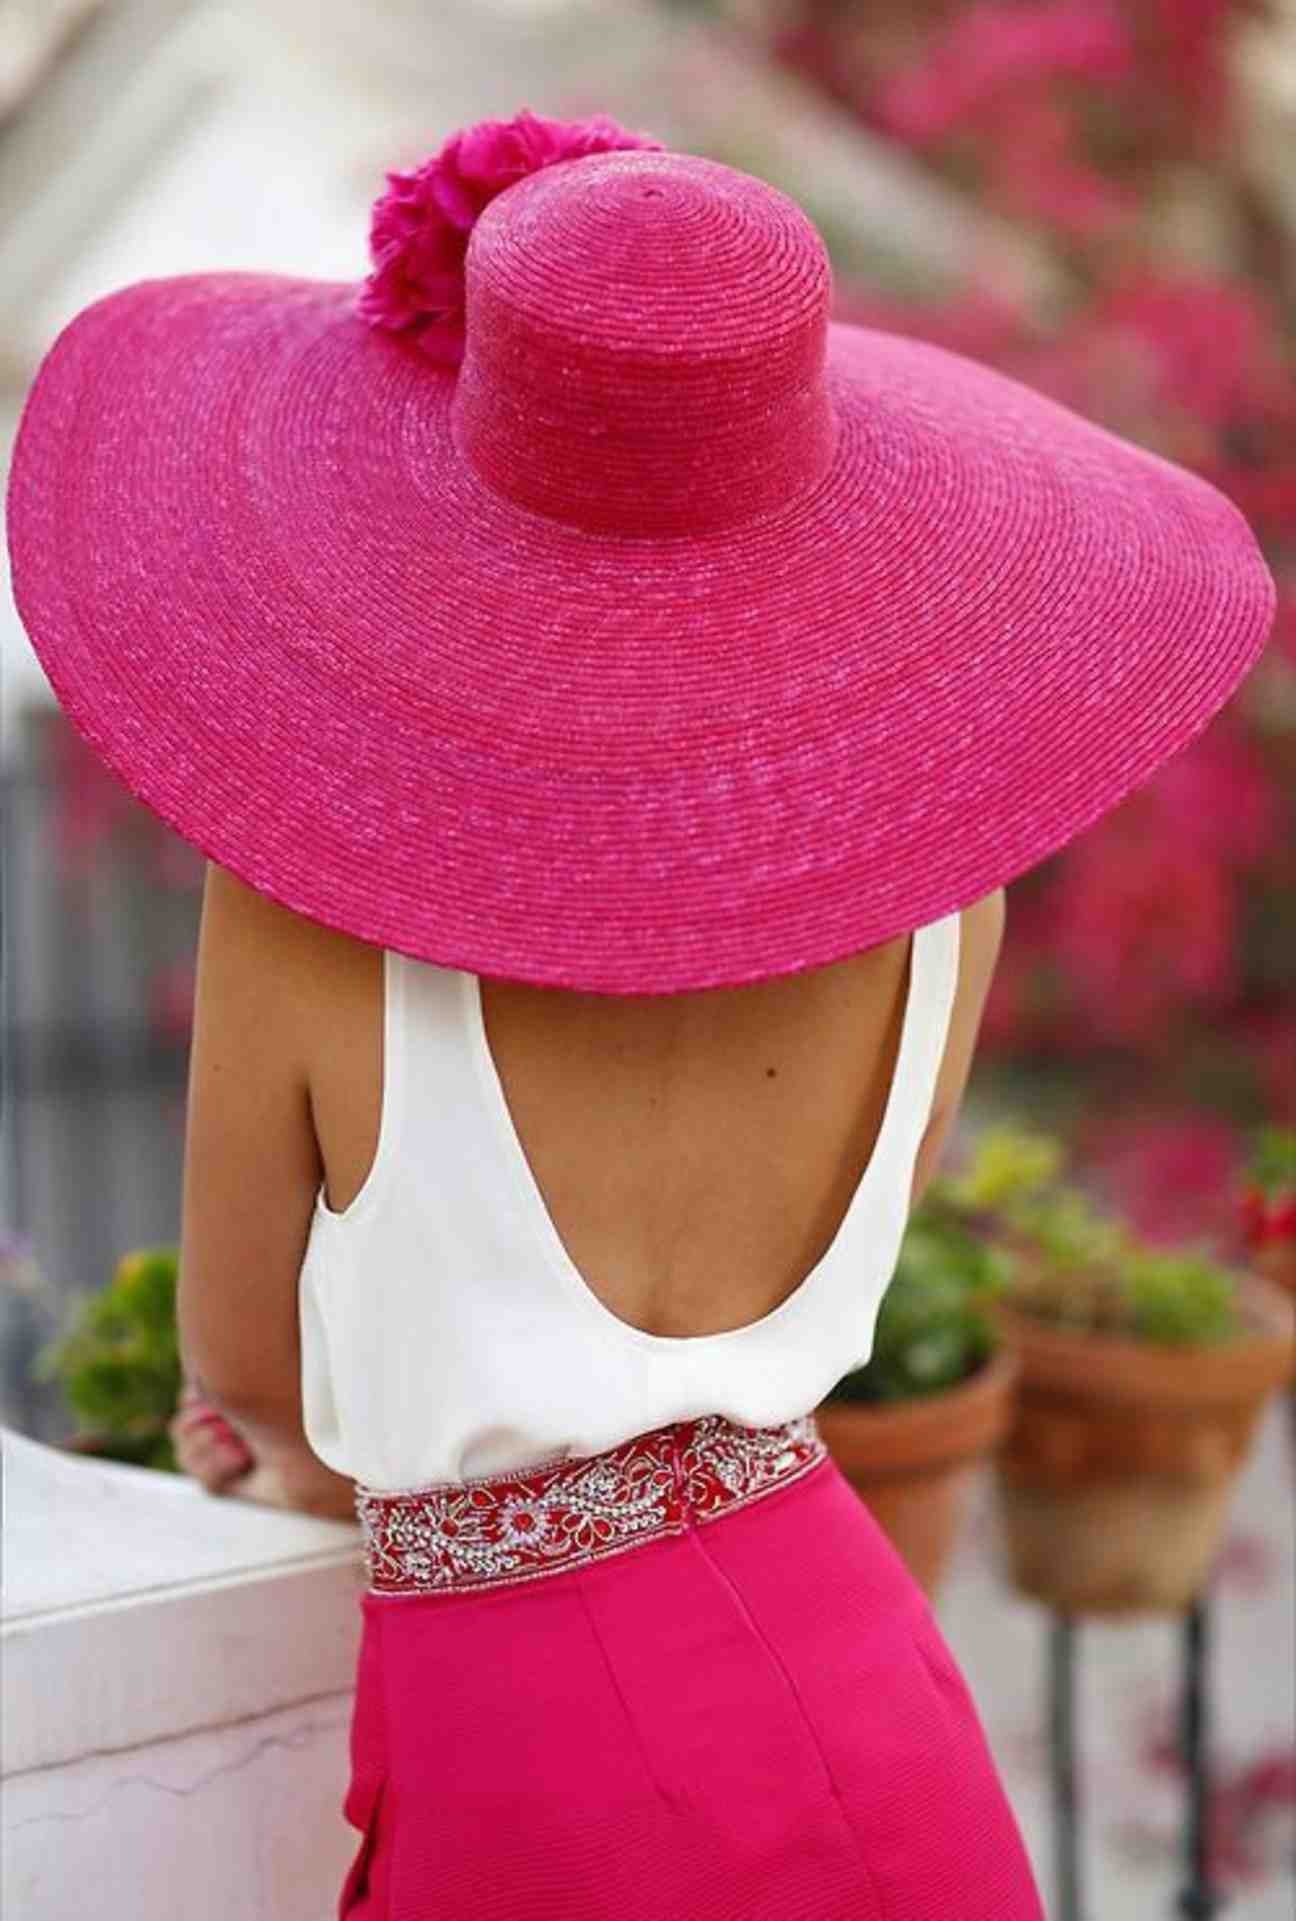 Wedding Hat For Women Many Stylish Inspirations And Hairstyles Ideas Decor Object Your Daily Dose Of Best Home Decorating Ideas Interior Design Inspiration